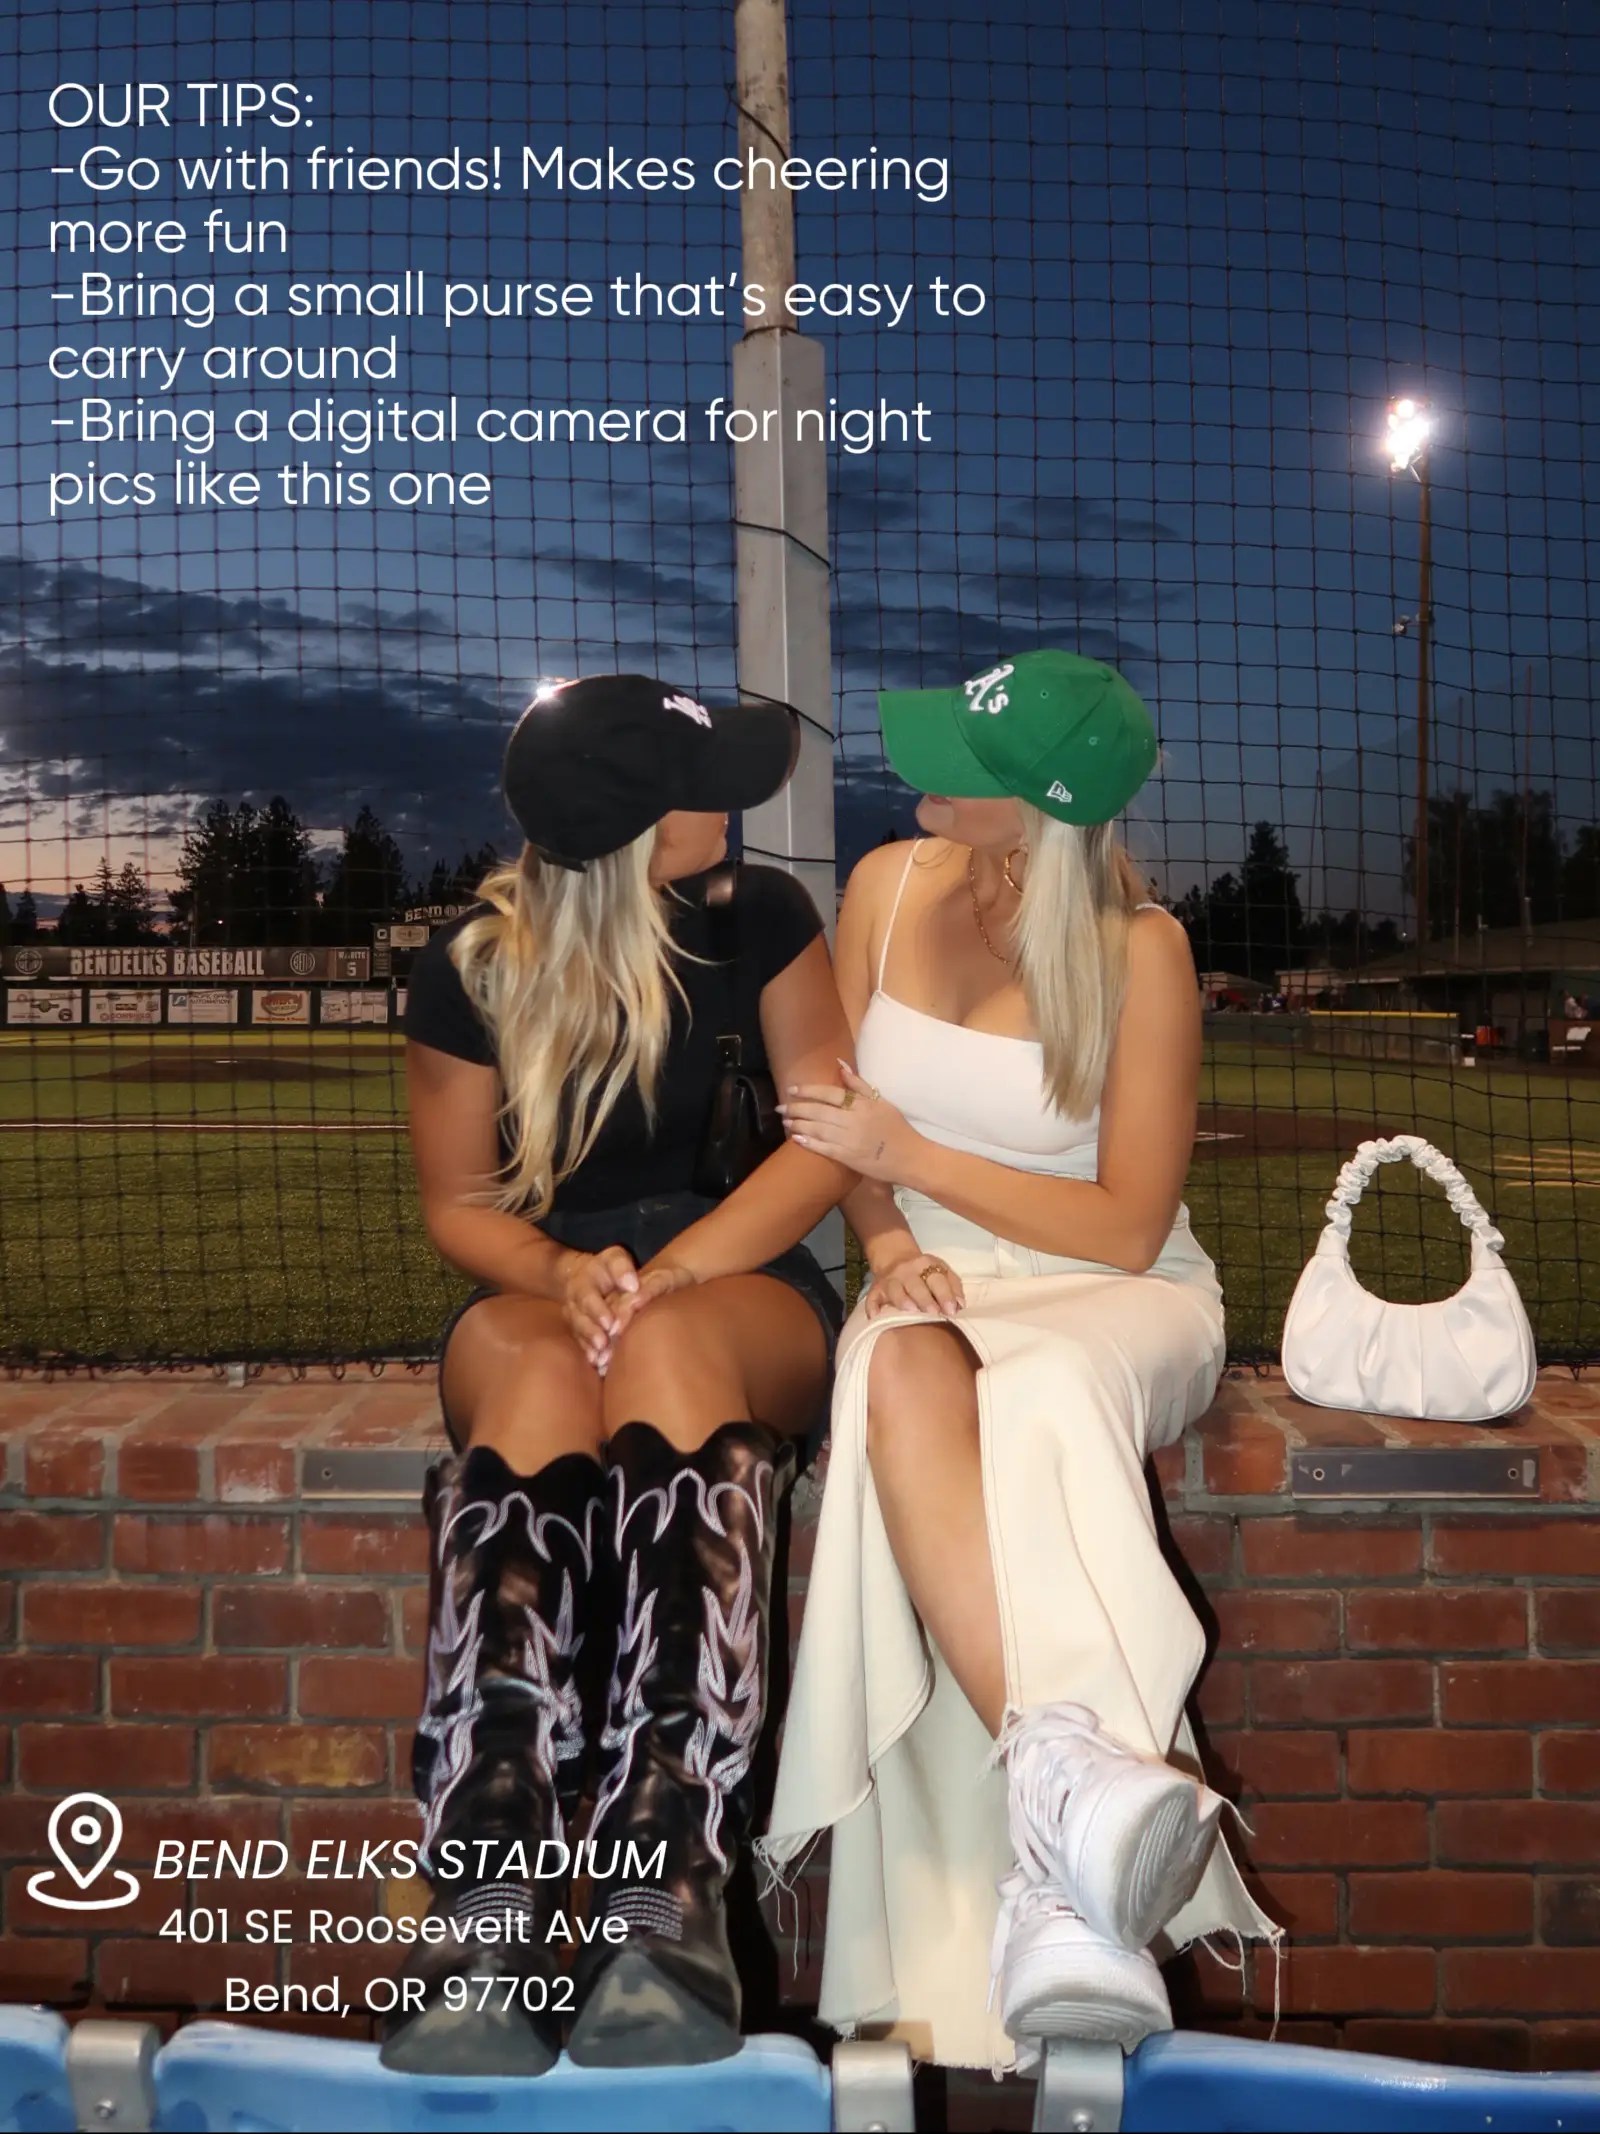 Outfit Tips and Ideas for Women: What to Wear to a Baseball Game